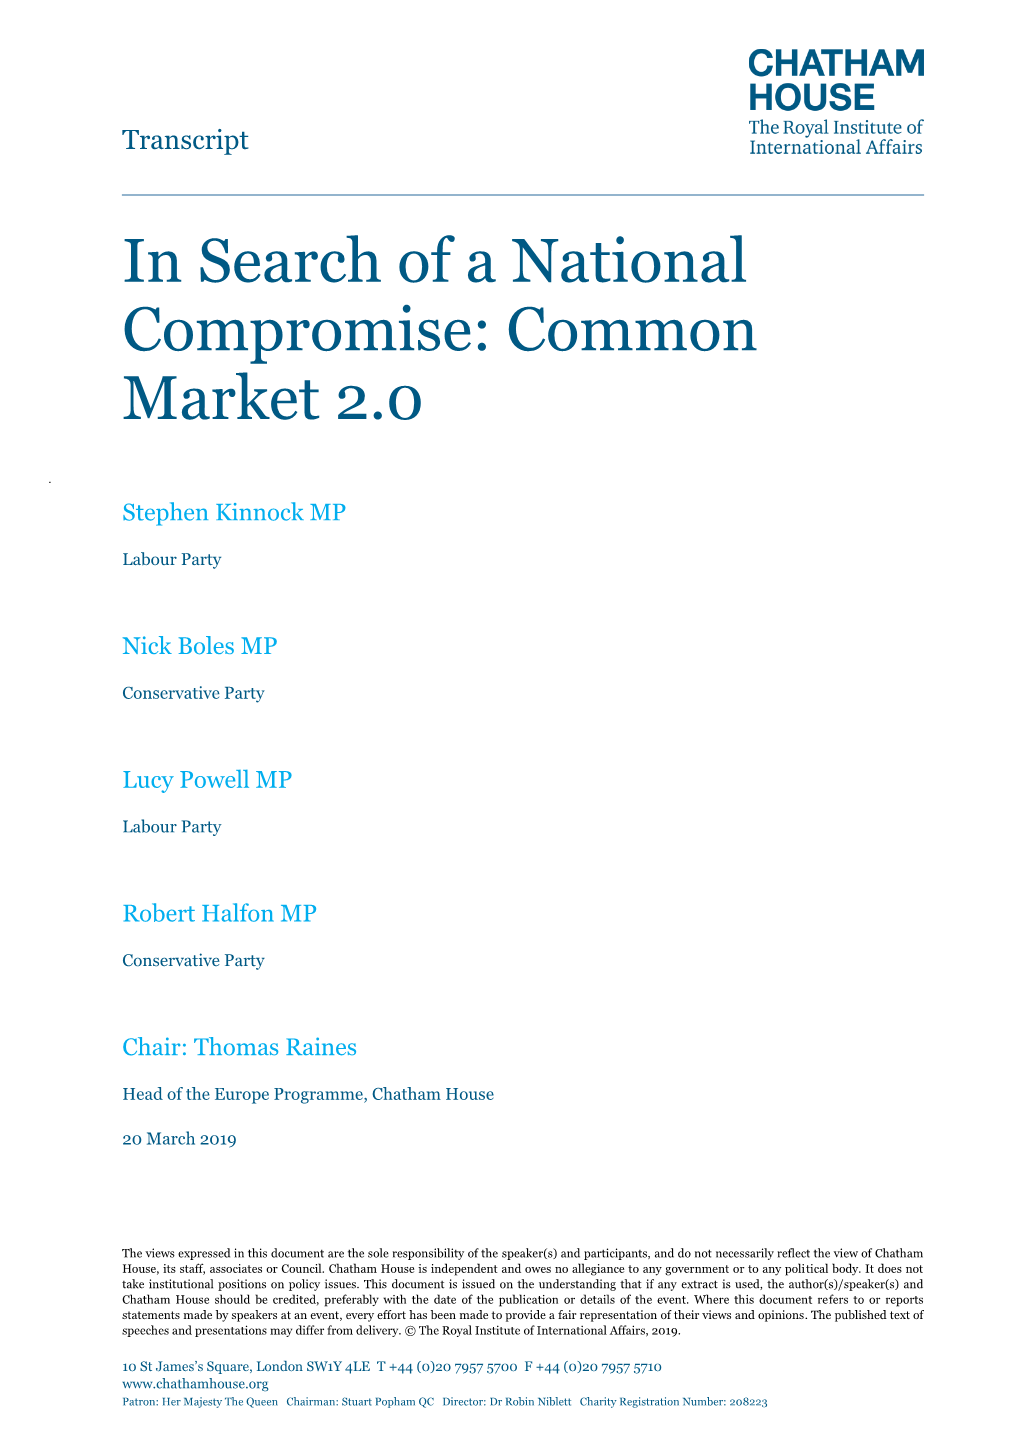 In Search of a National Compromise: Common Market 2.0